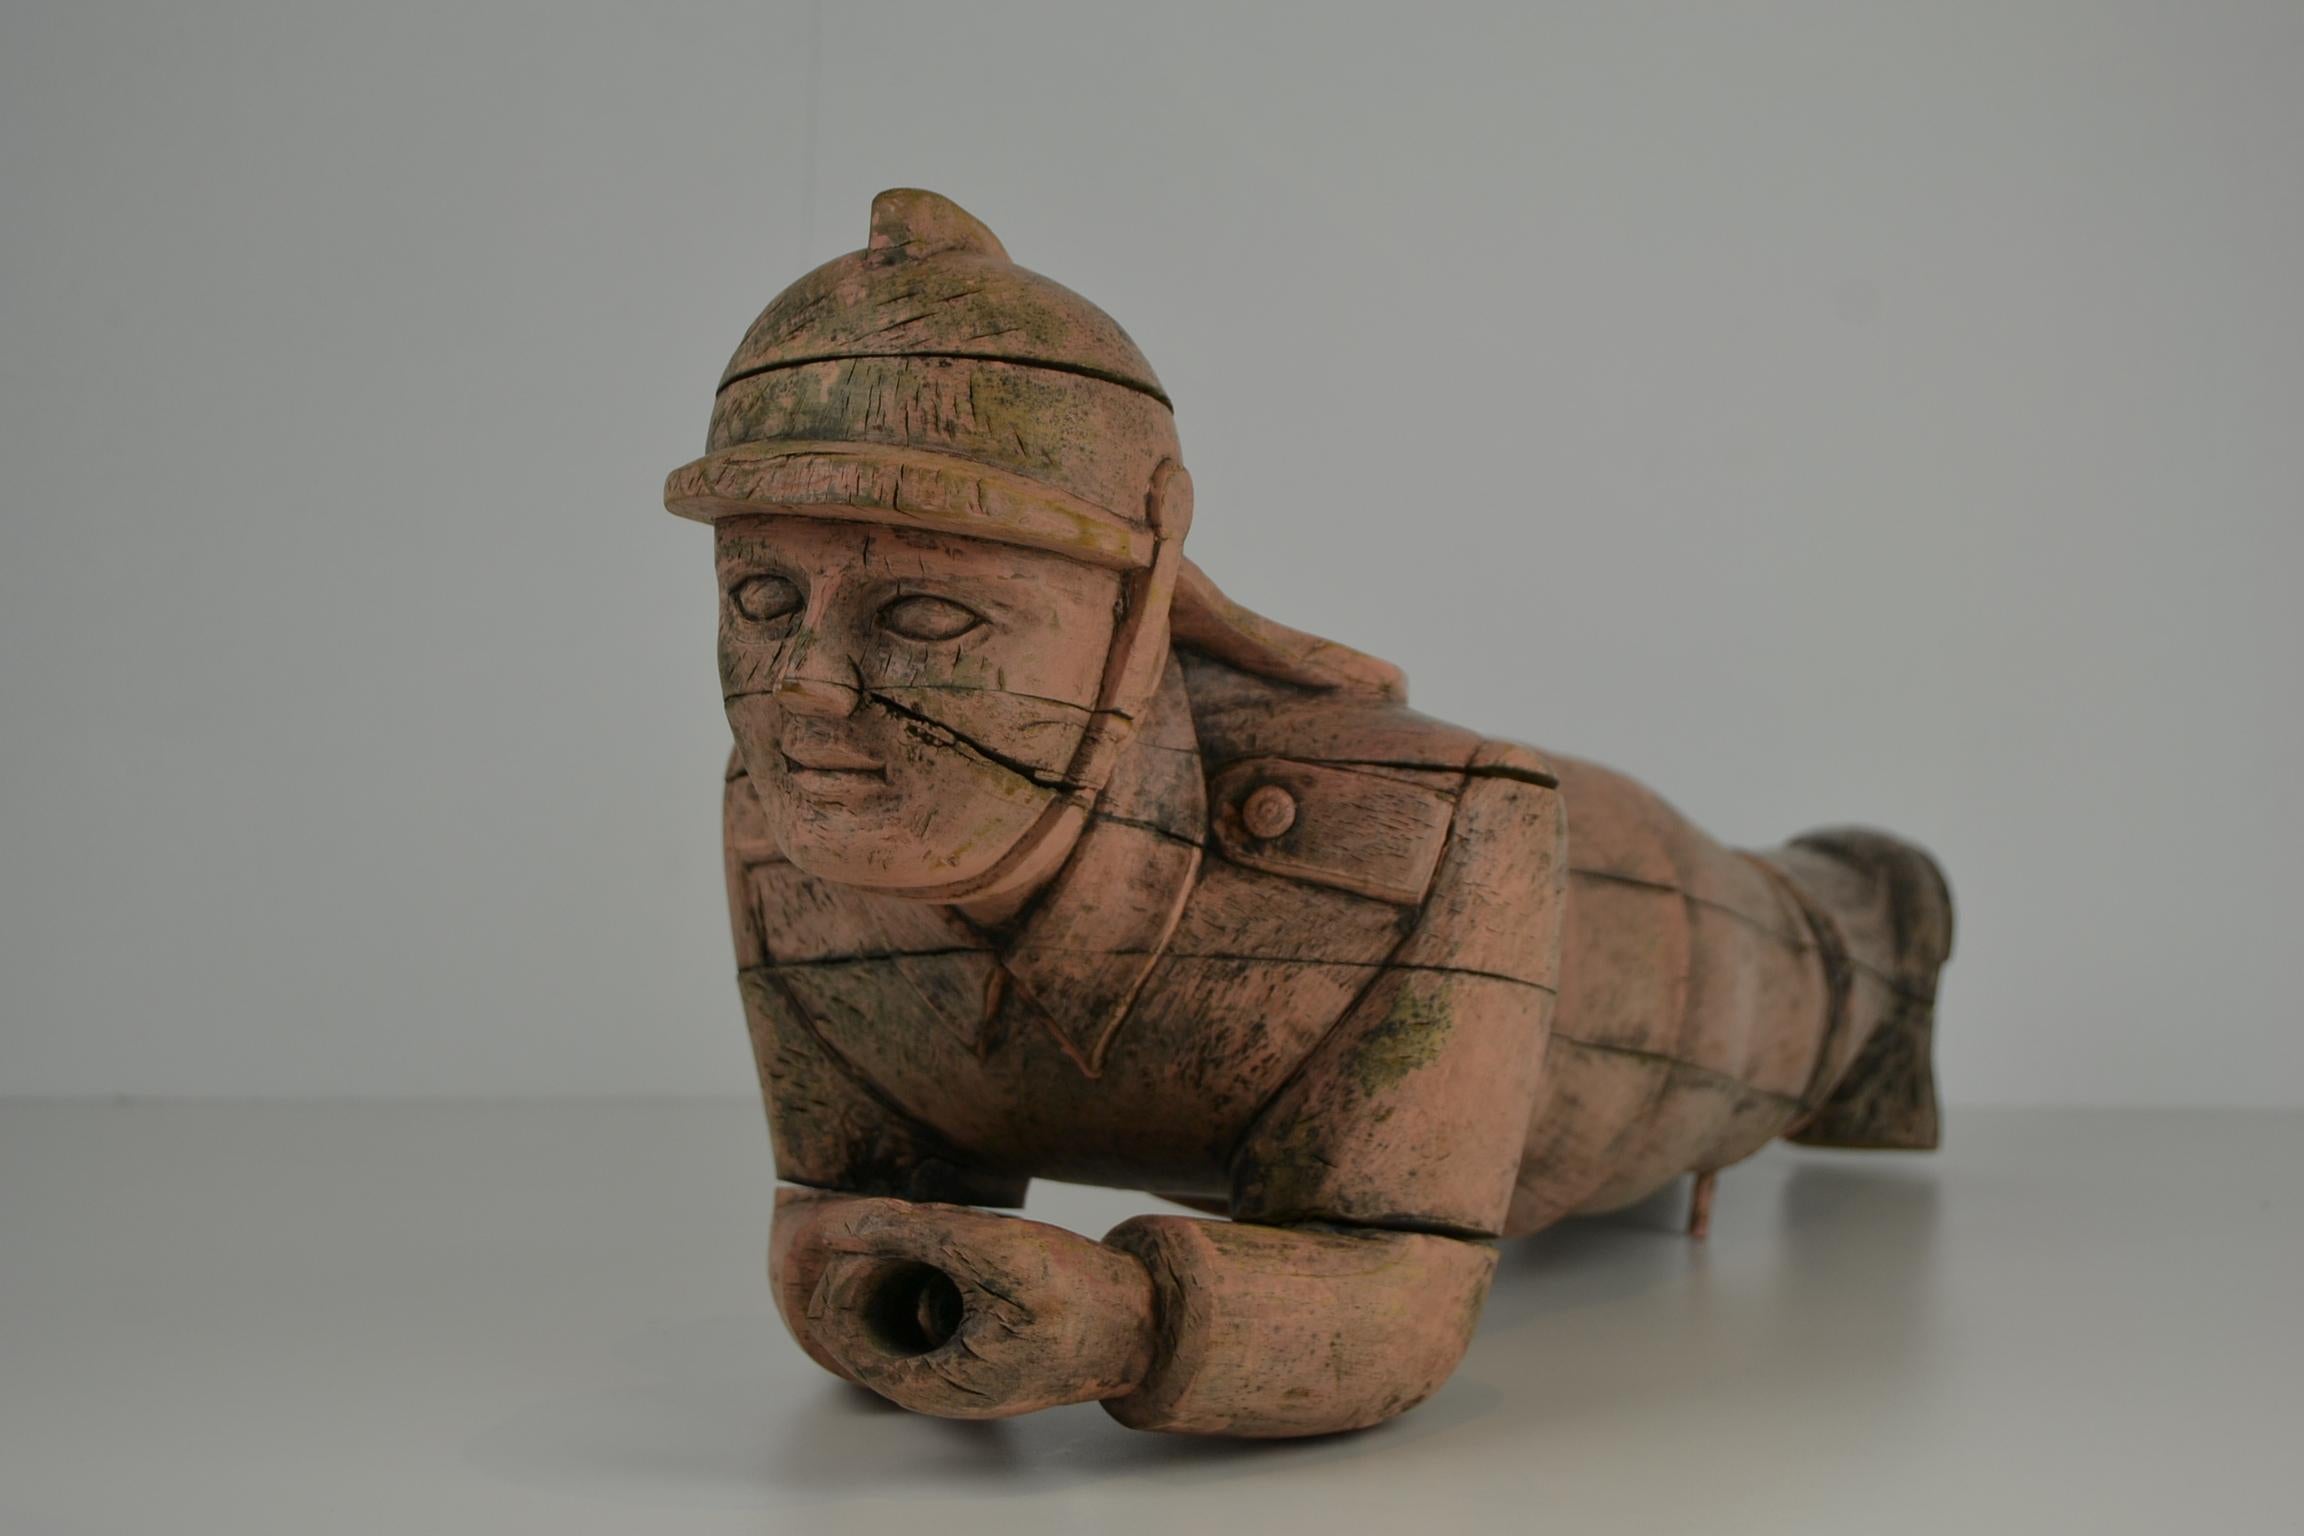 American Craftsman Carousel Carved Wood Fire Man Sculpture, Wilhelm Hennecke Germany, 1950s